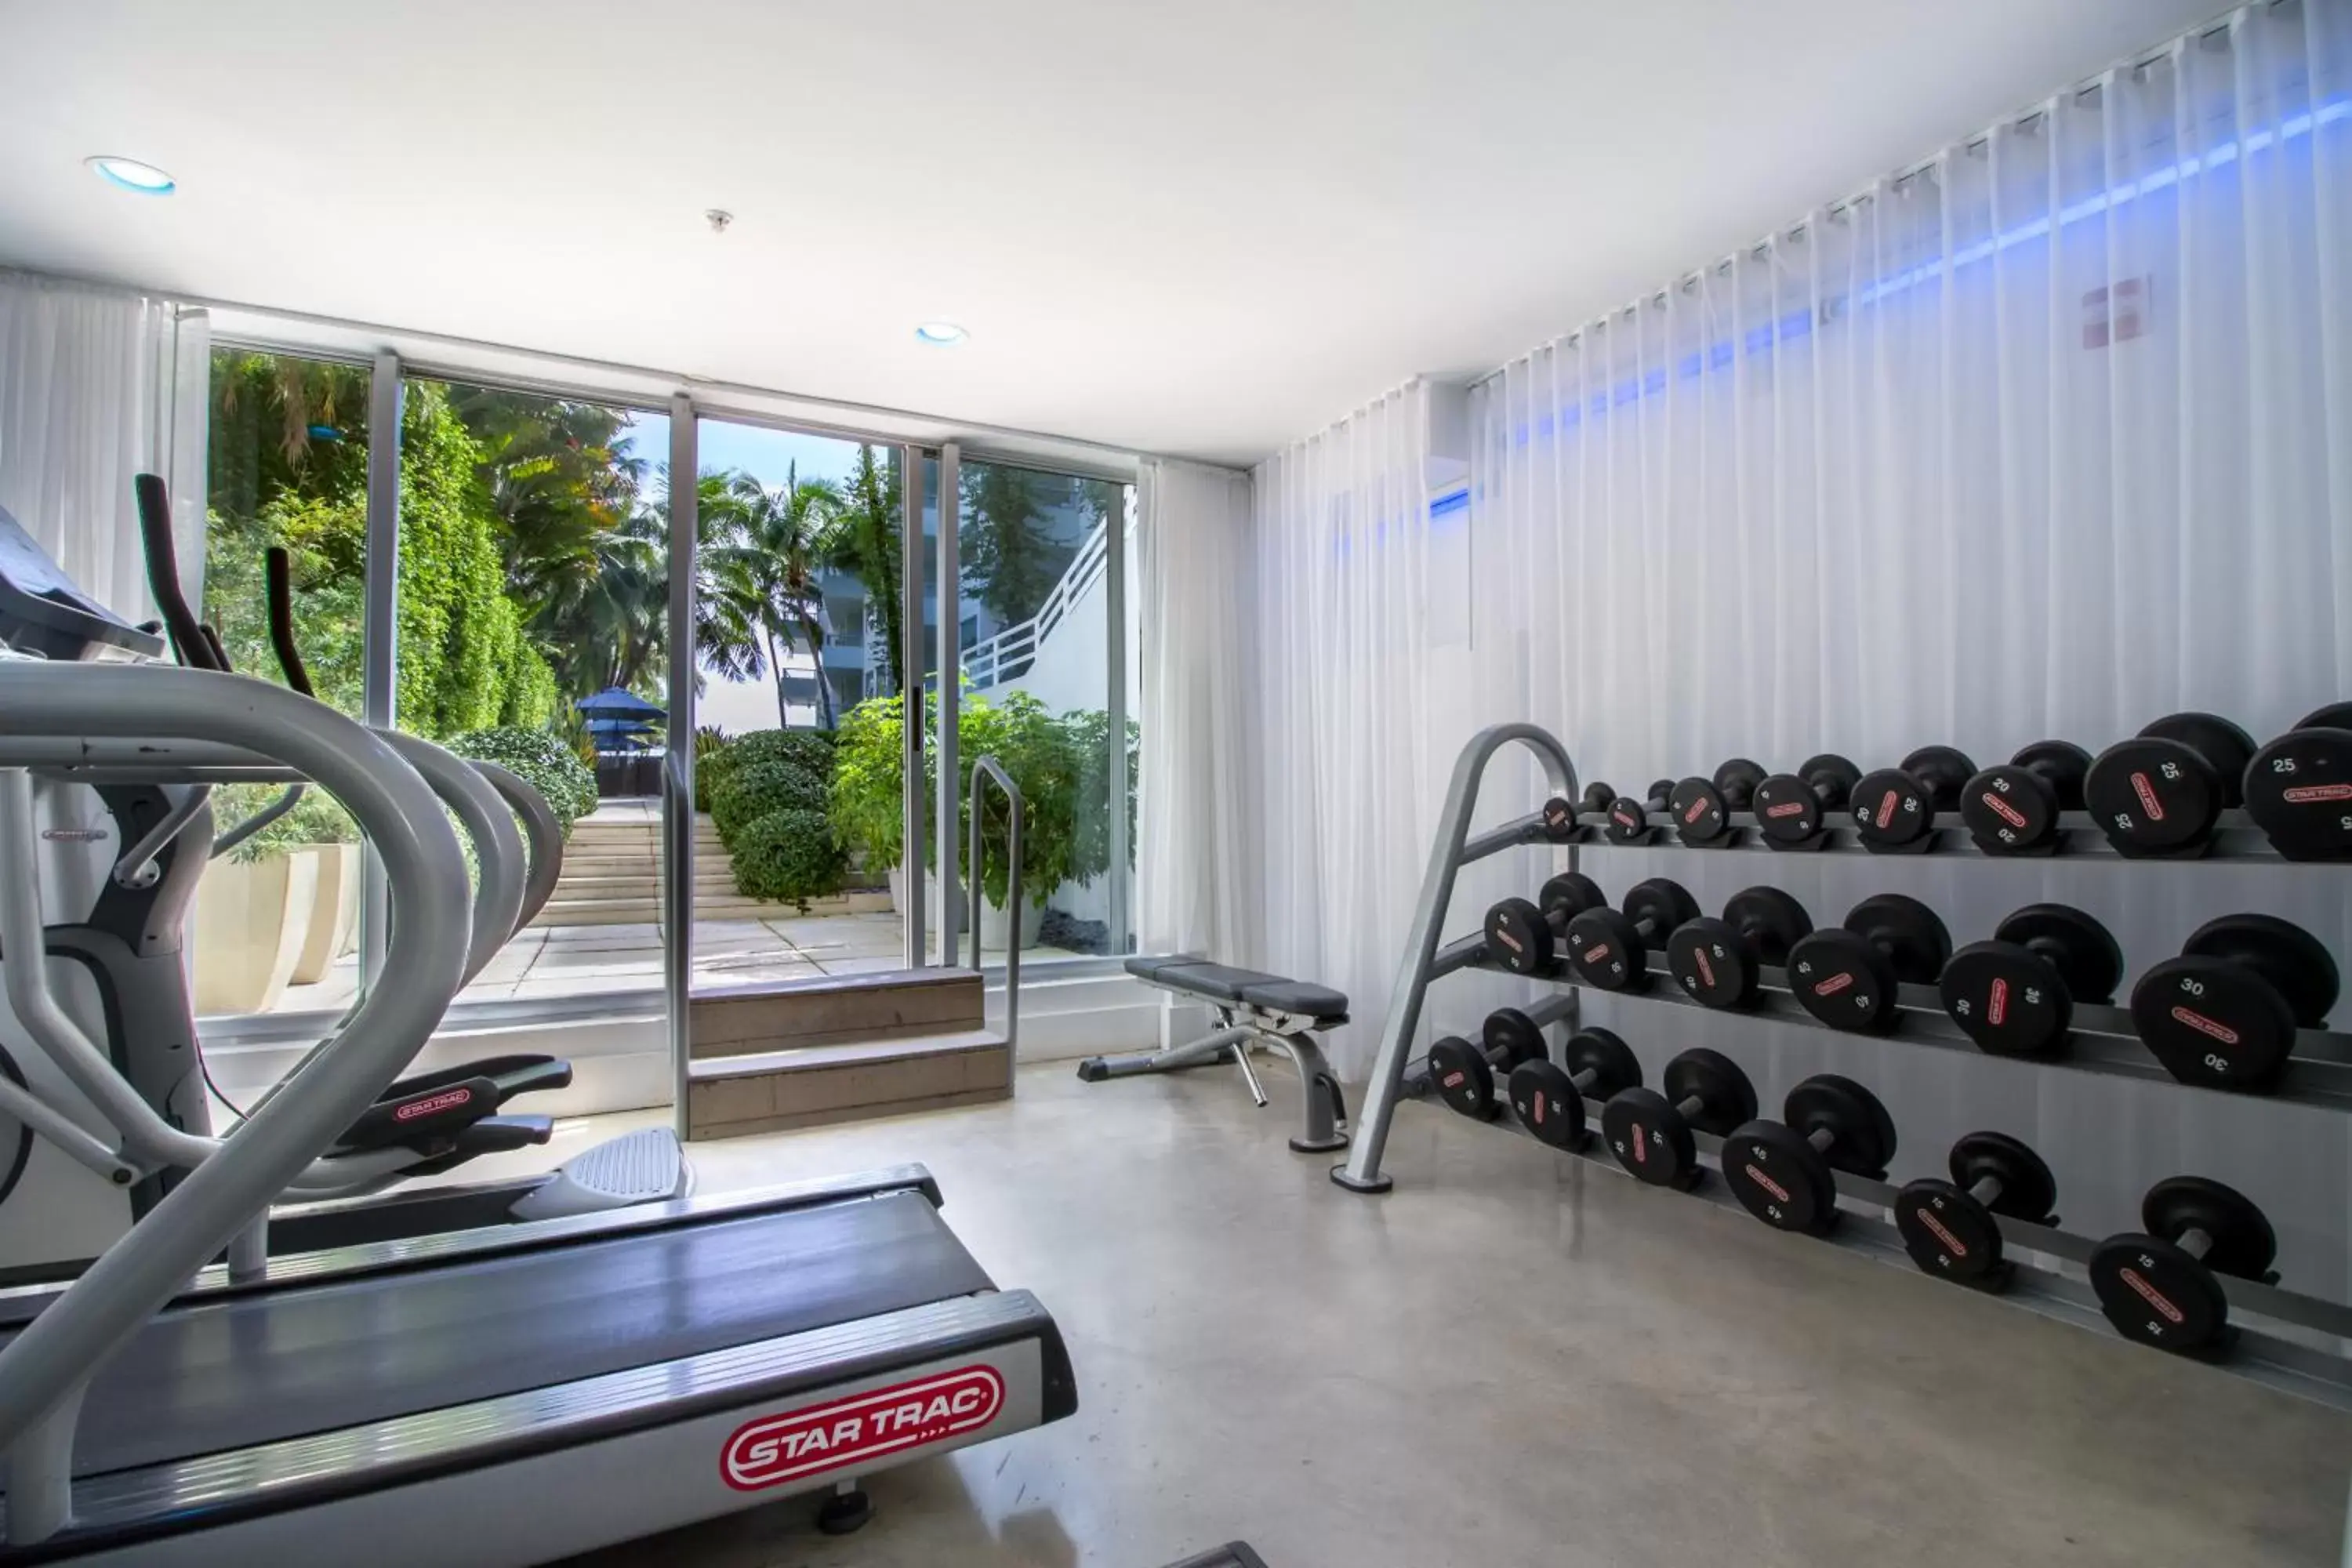 Fitness centre/facilities, Fitness Center/Facilities in The Sagamore Hotel South Beach